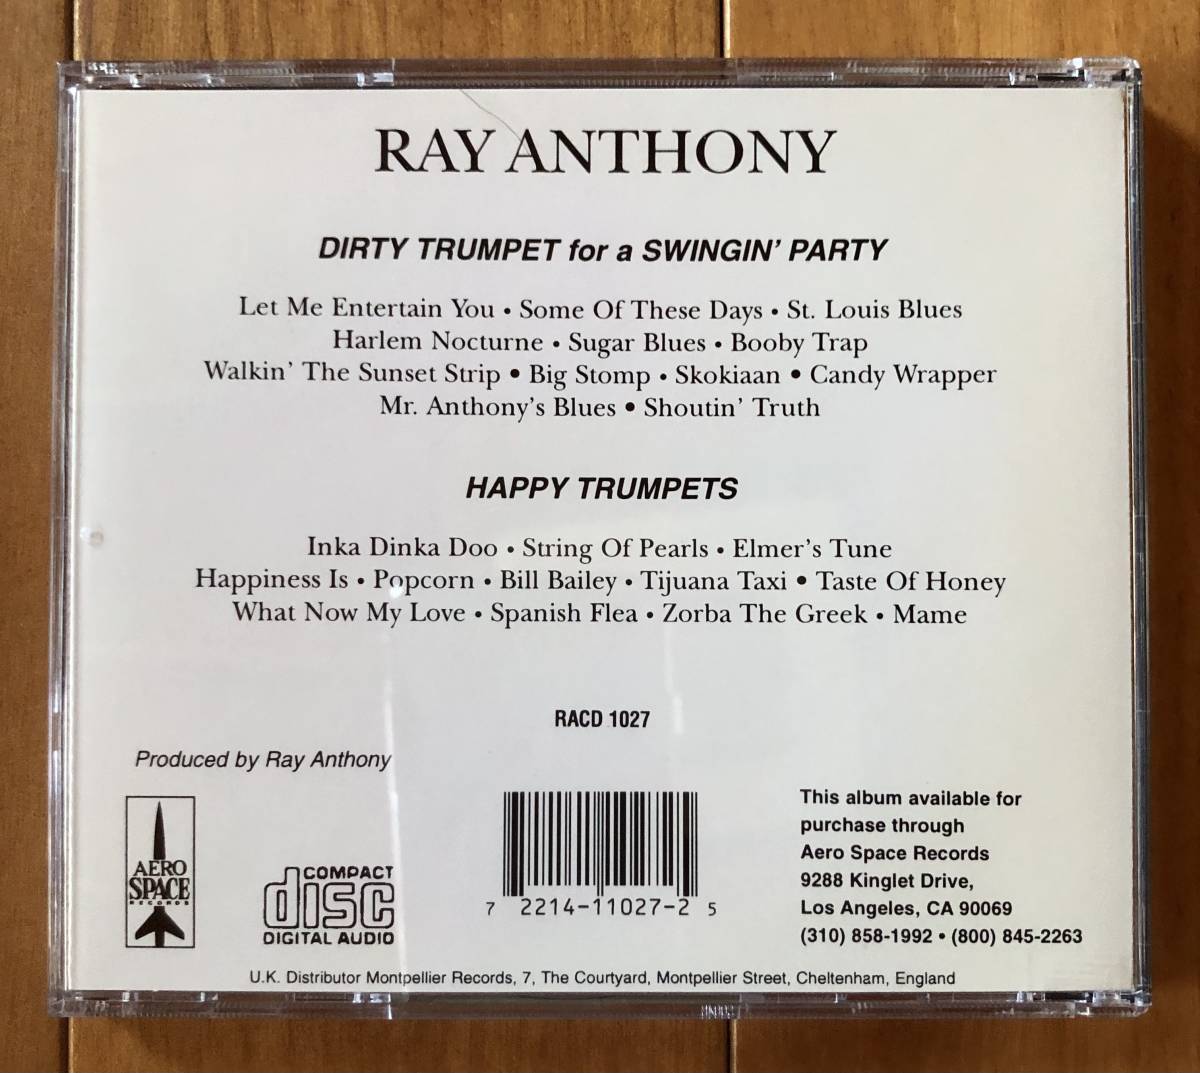 CD-June / Aero Space Records / Ray Anthony / Dirty Trumpet / Happy Trumpets / Racd 1027_画像2